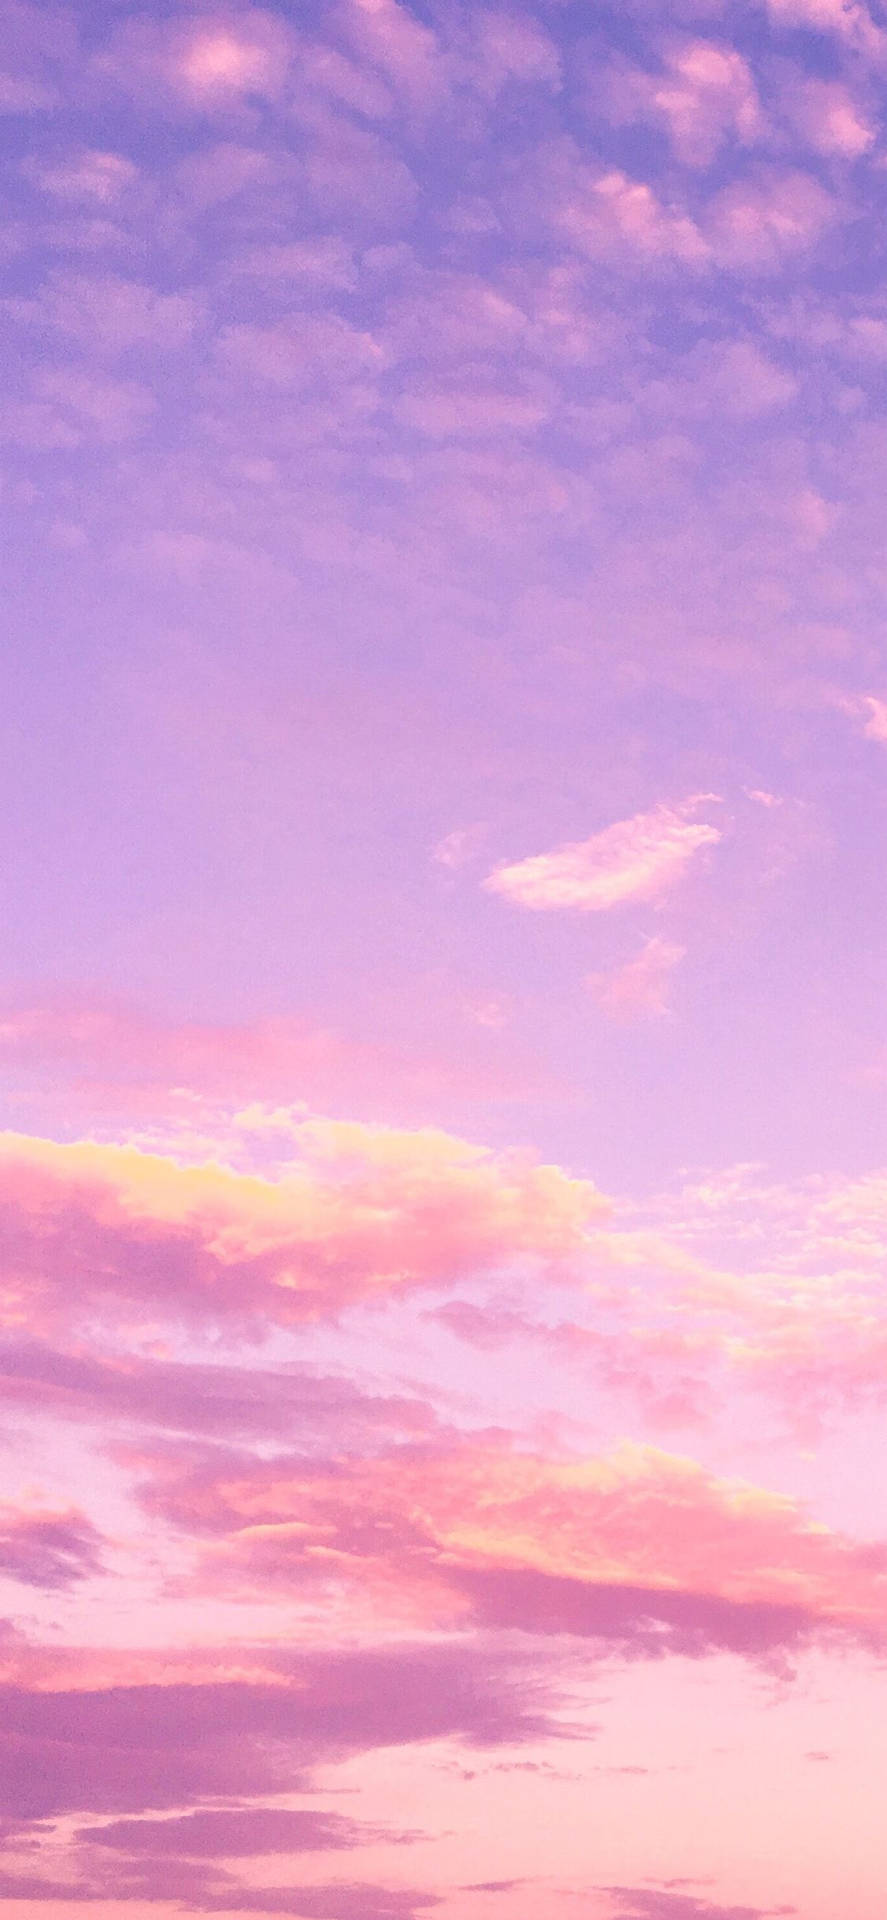 Pink And Blue Clouds Phone Wallpaper